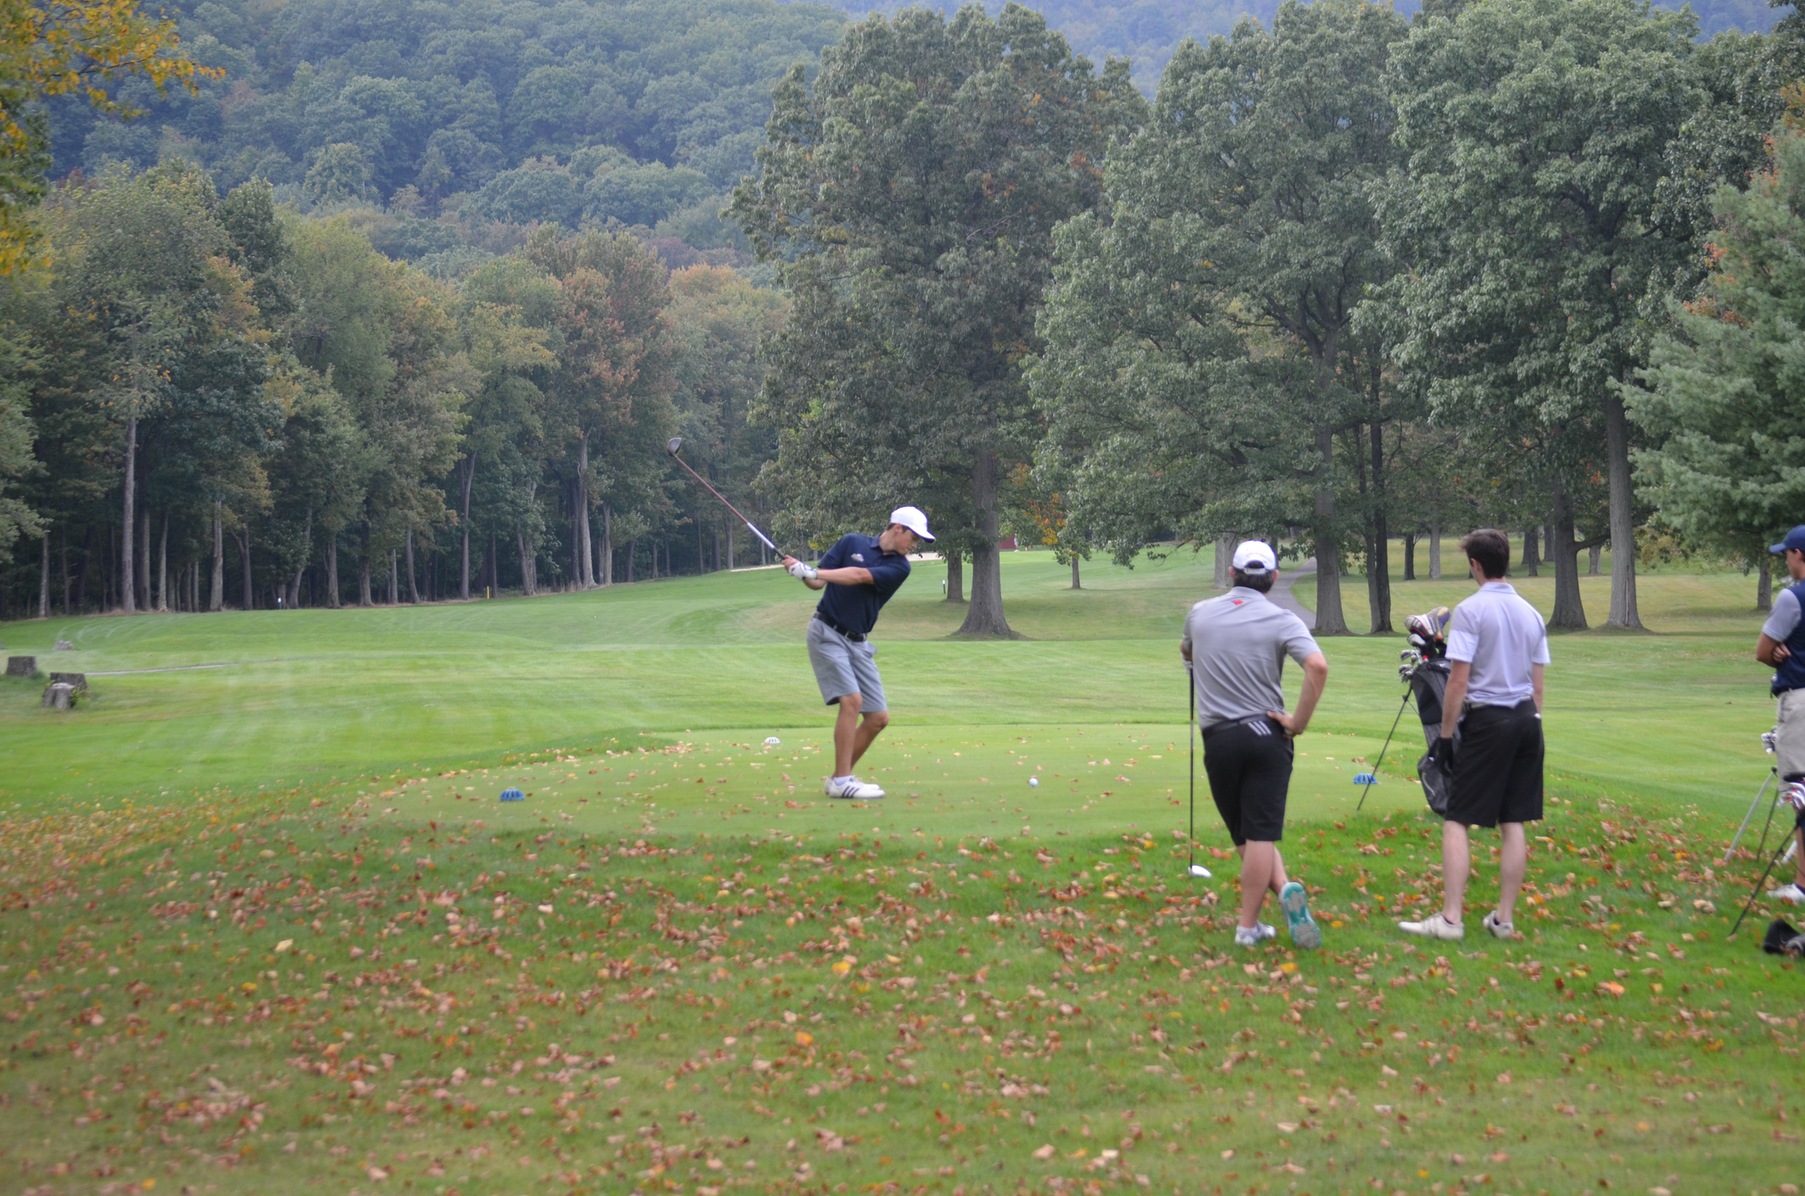 Men’s Golf Team Completes Weekend of Play at Summit Country Club